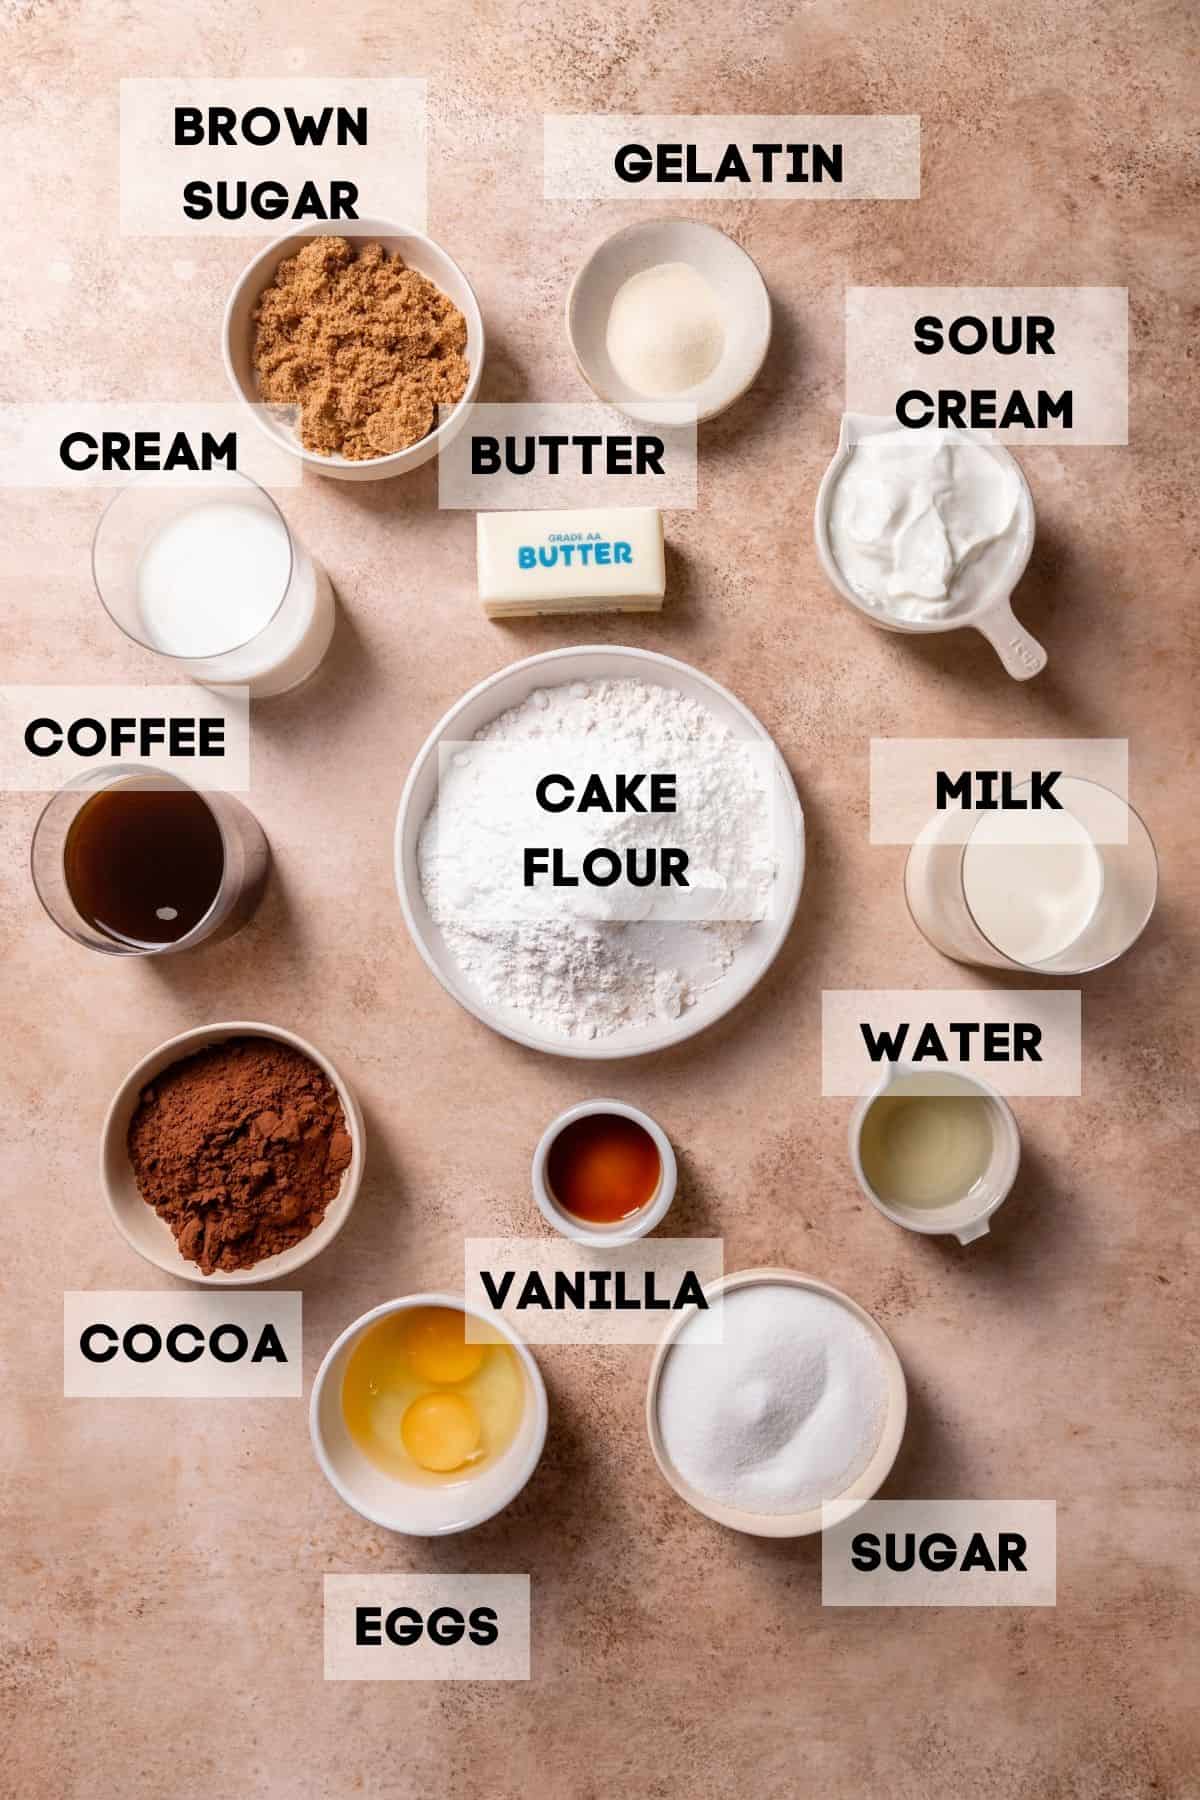 Ingredients to make ding dong cake in bowls with labels.